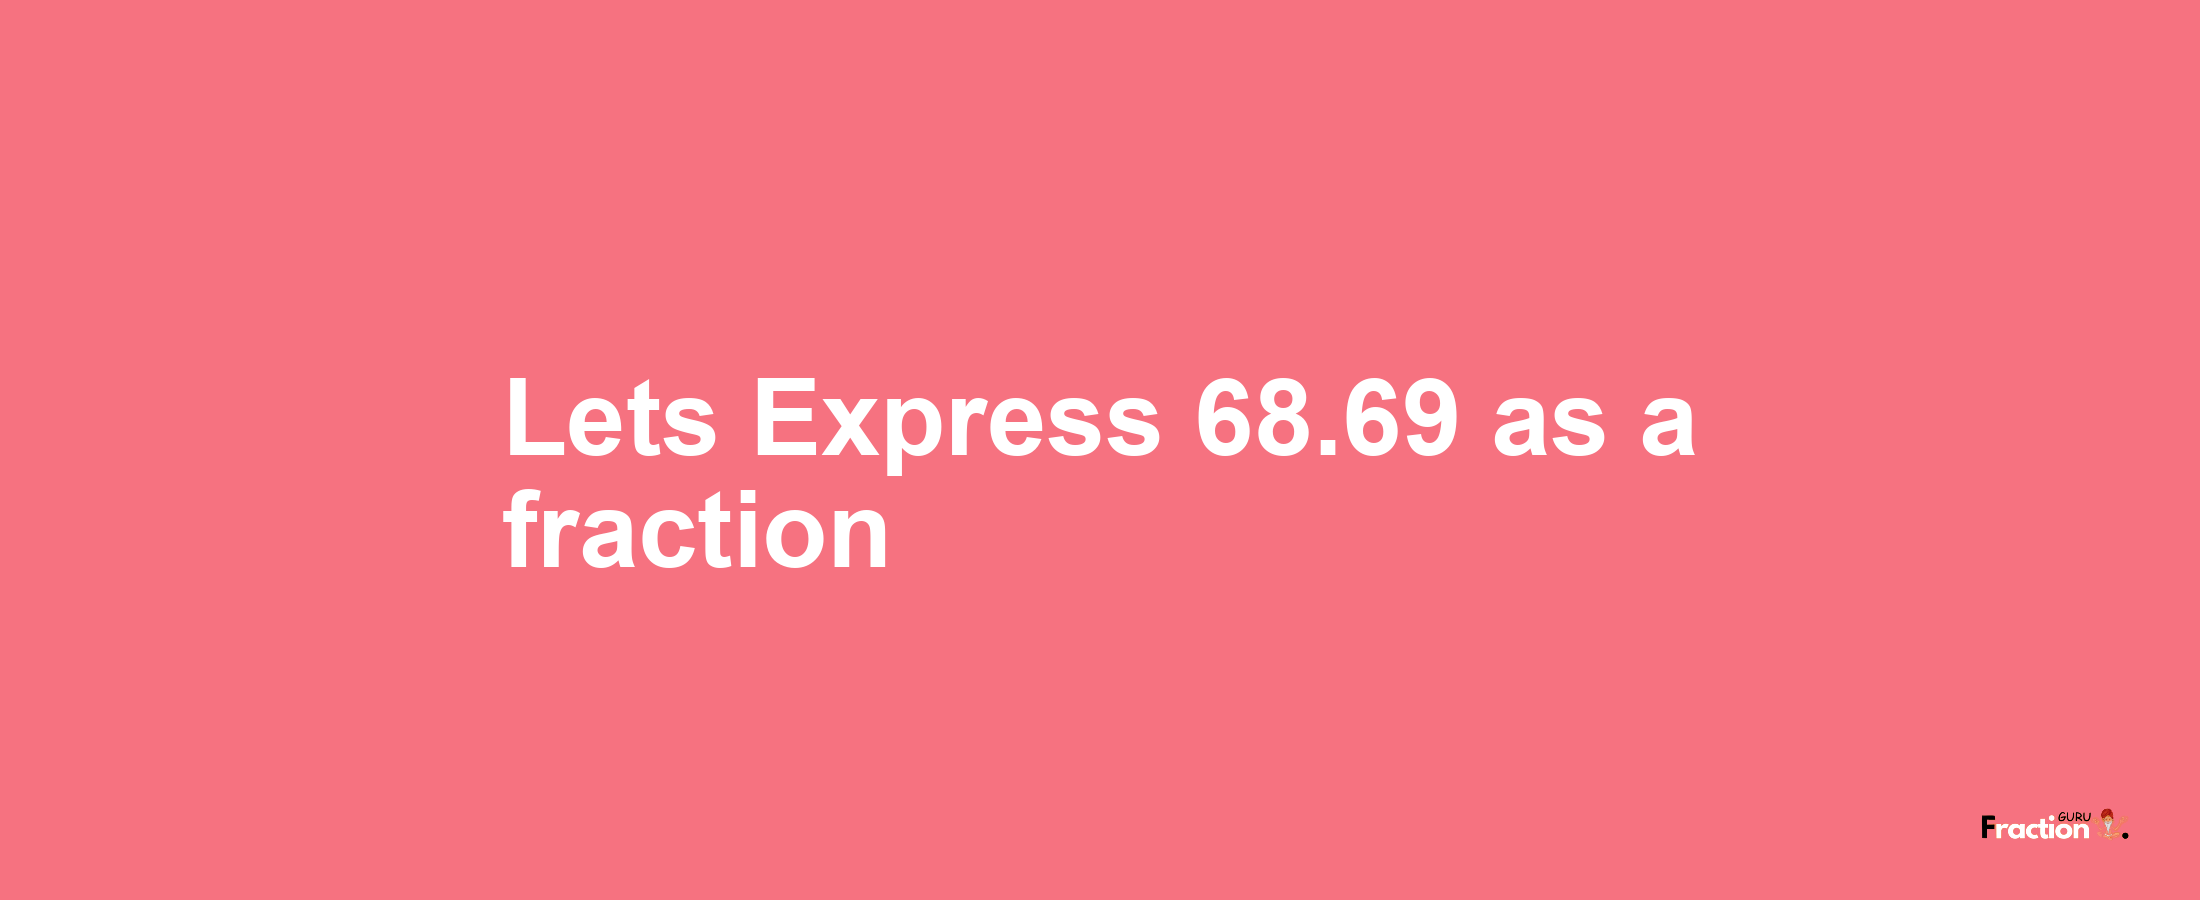 Lets Express 68.69 as afraction